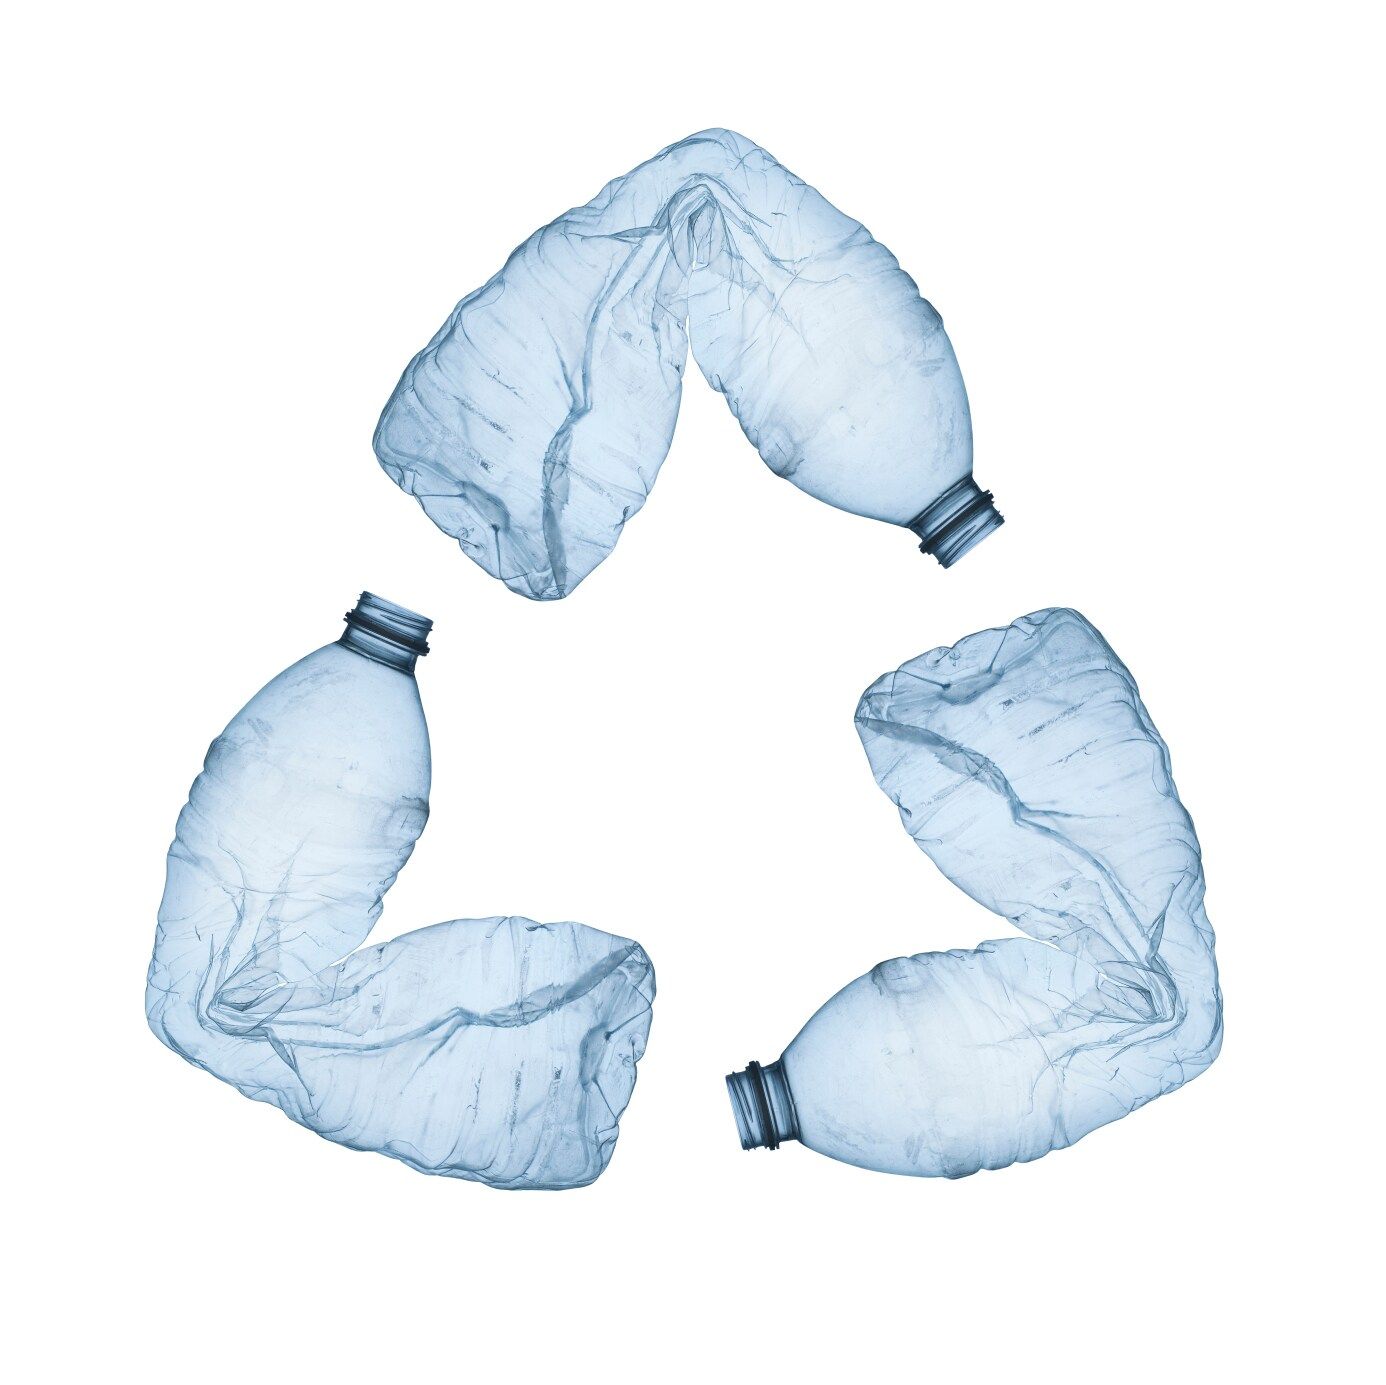 Recycle symbol formed from PET/rPET plastic bottles.